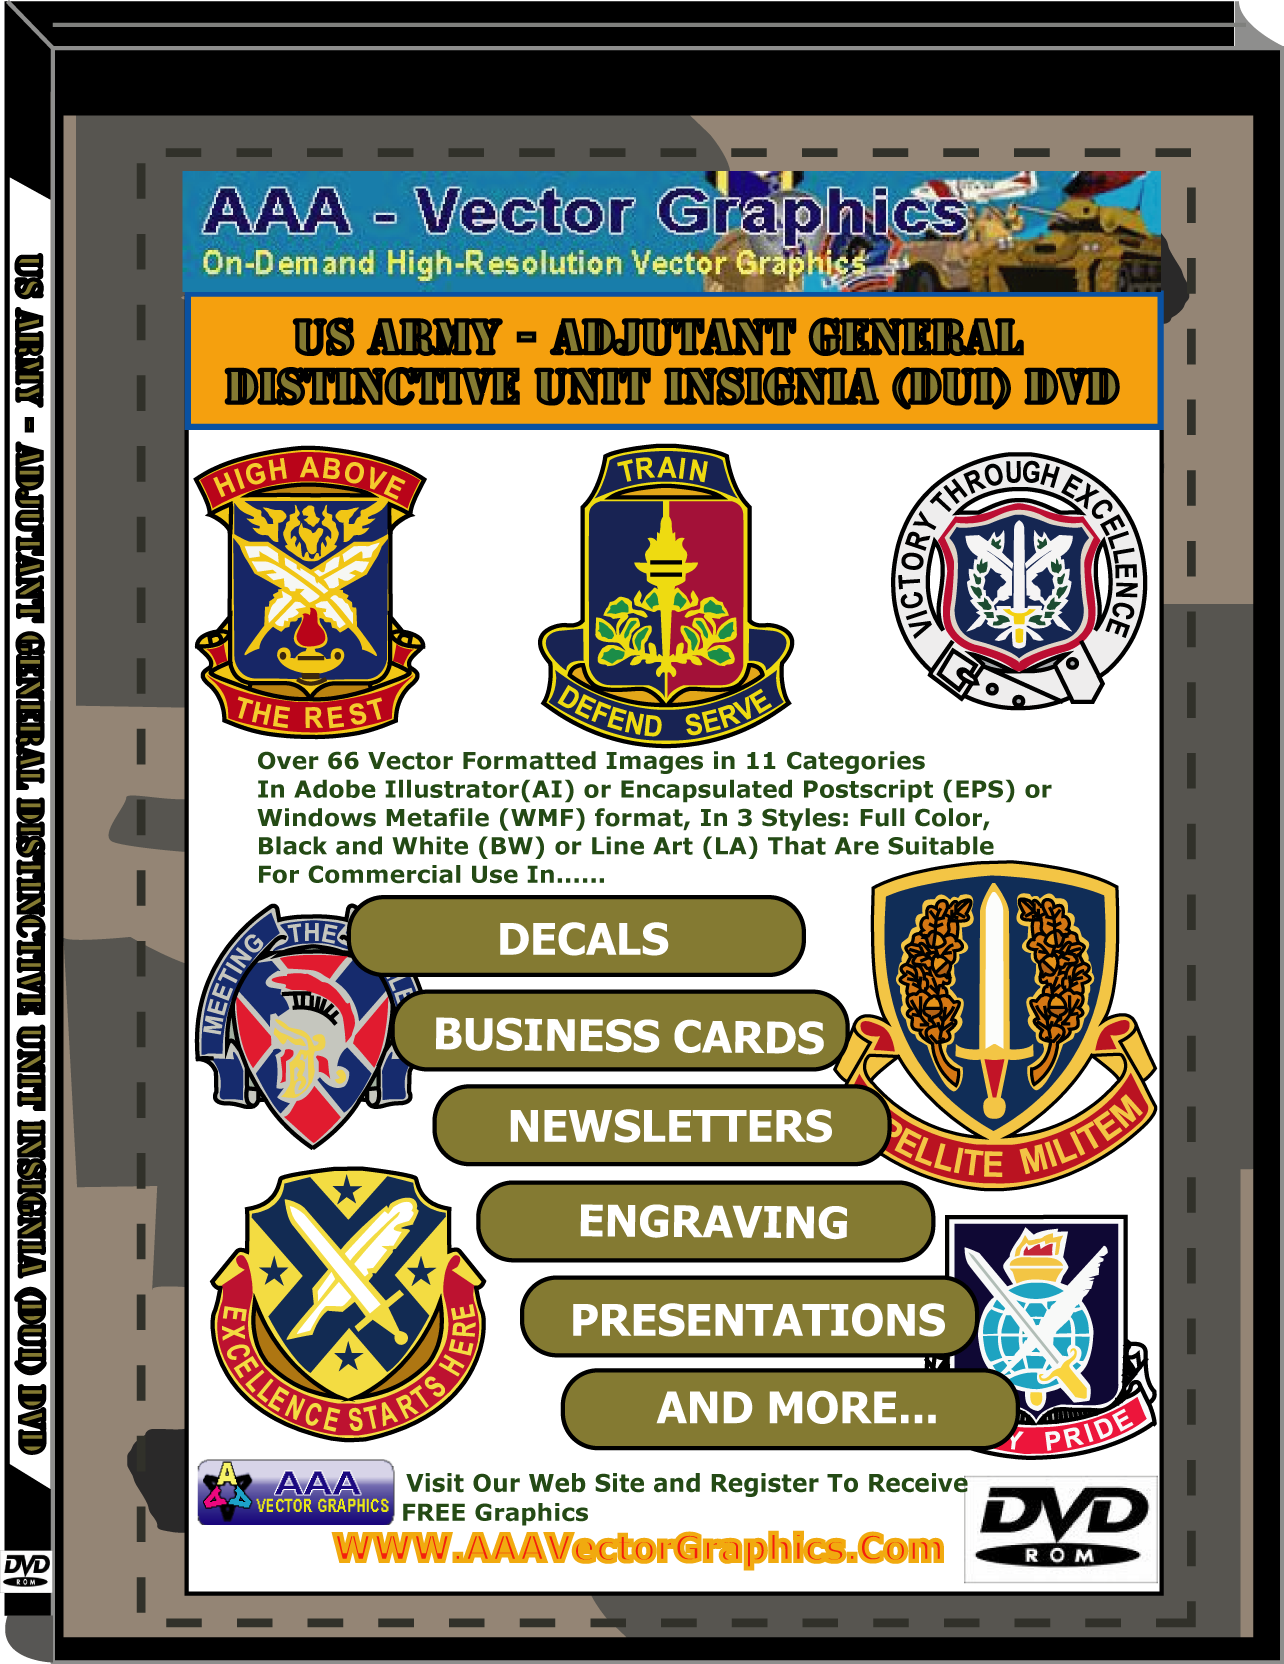 US Army - Adjutant General Insignia DUIs DVD